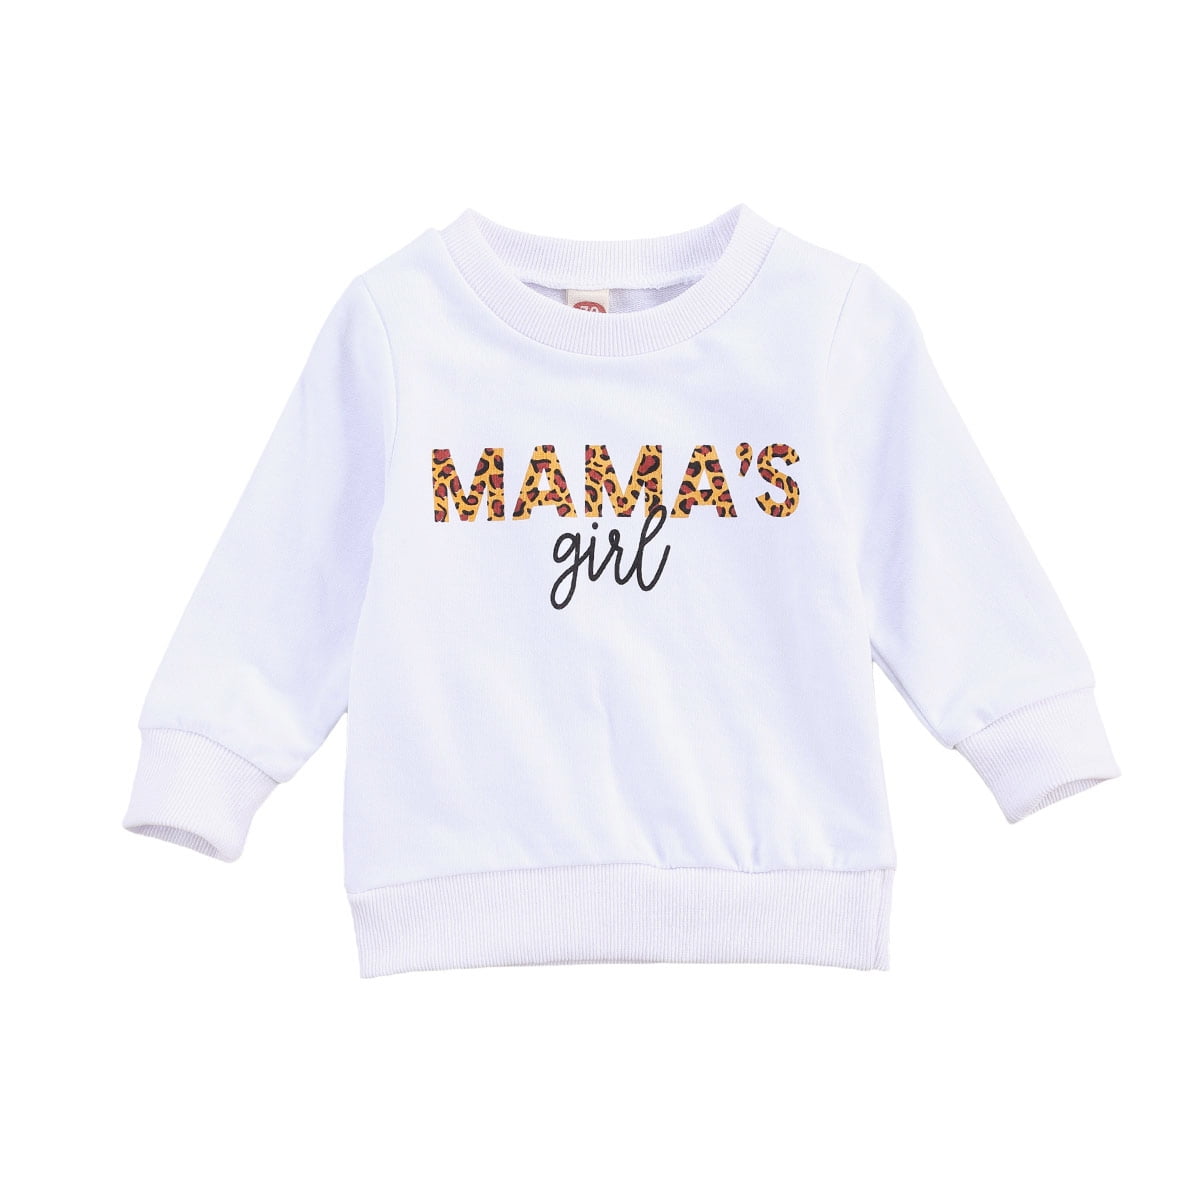 Infant Toddler Baby Girl Long Sleeve Pullover Sweatshirt Letter Print Hoodie Tops Fall Outfit Casual Clothes 